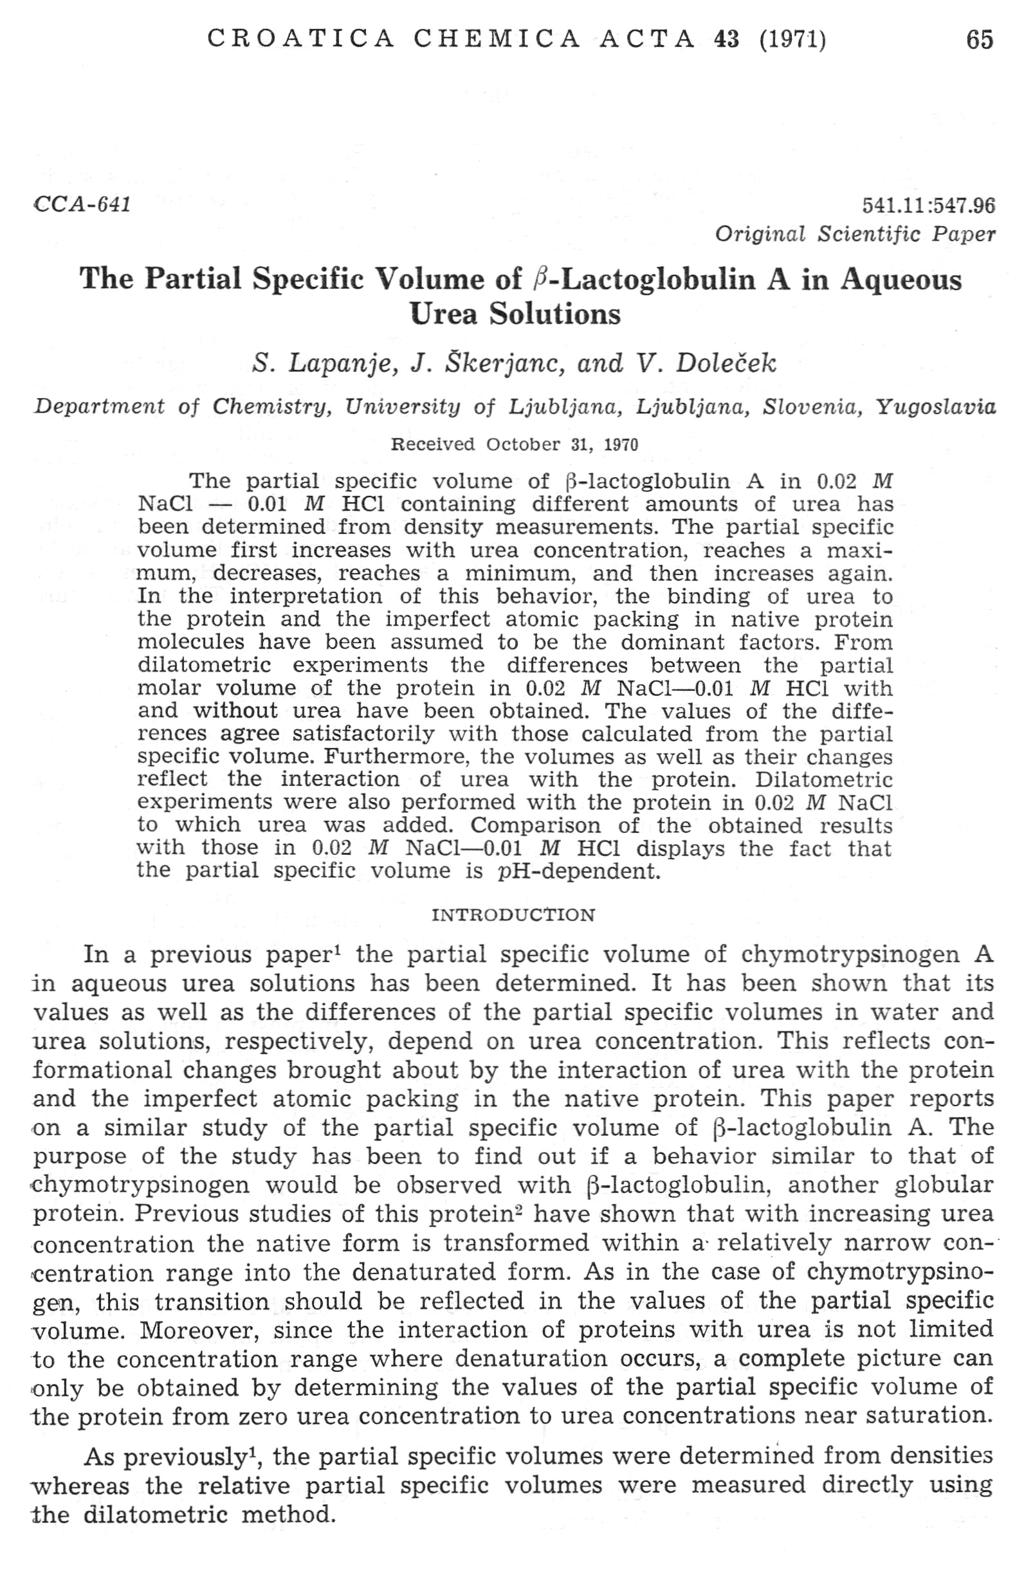 CR 0 AT IC A CHEMIC A ACT A 43 (1971) CCA641 65 541.11 :547.96 Original Scientific Paper The Partial Specific Volume of PLactoglobulin A in Aqueous Urea Solutions S. Lapanje, J. Skerjanc, and V.